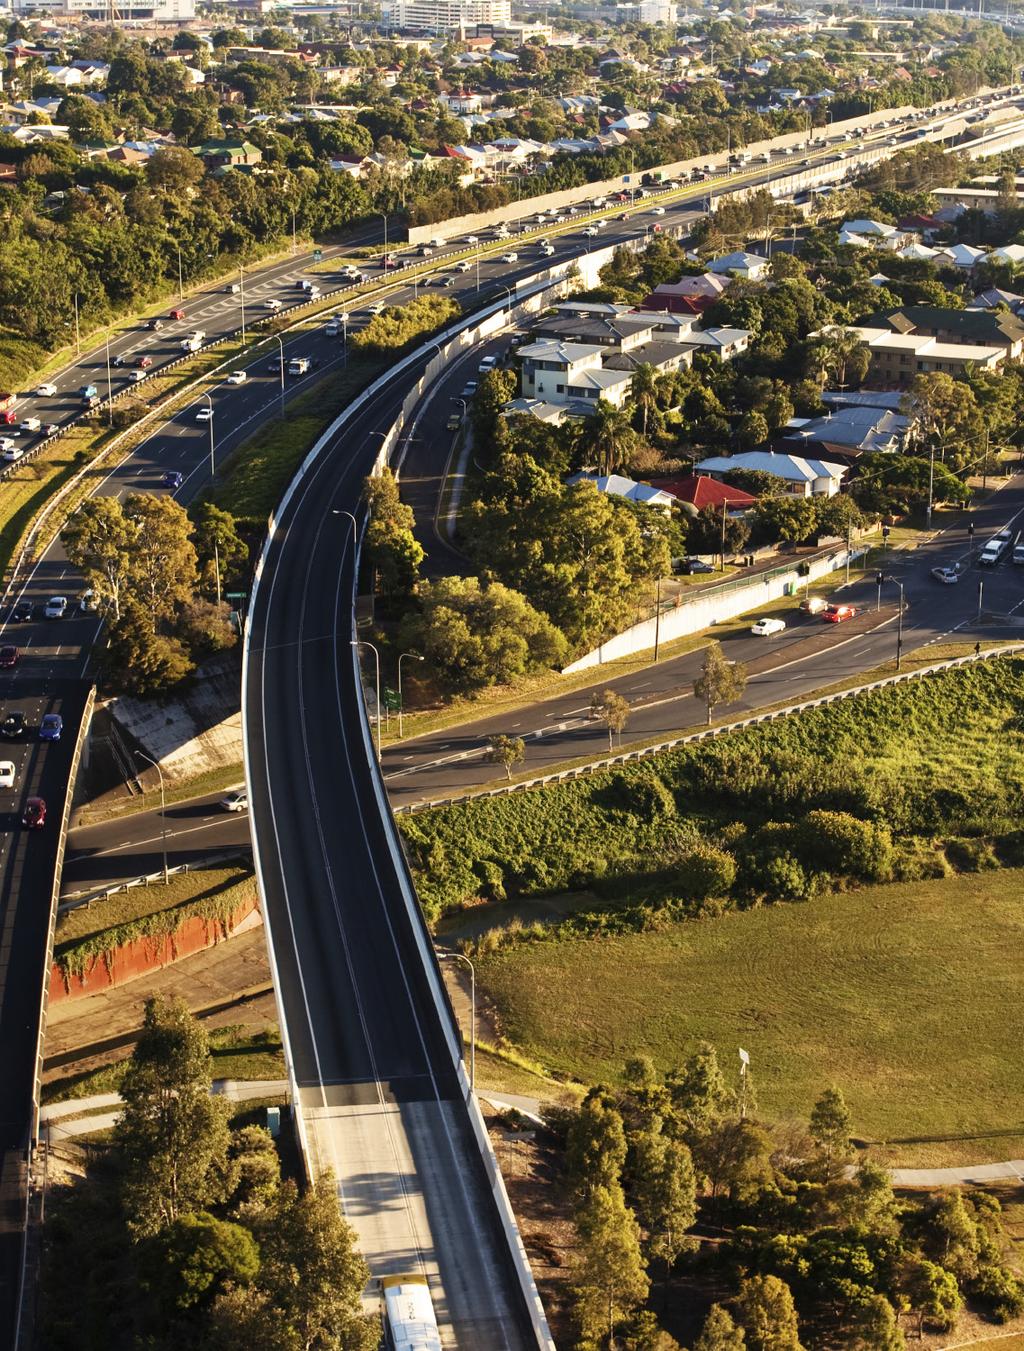 Investment Opportunity Investment surrounding framework includes the expansion and redevelopments of surrounding infrastructure such as Coomera Town Centre, Gold Coast Light Rail, Pacific